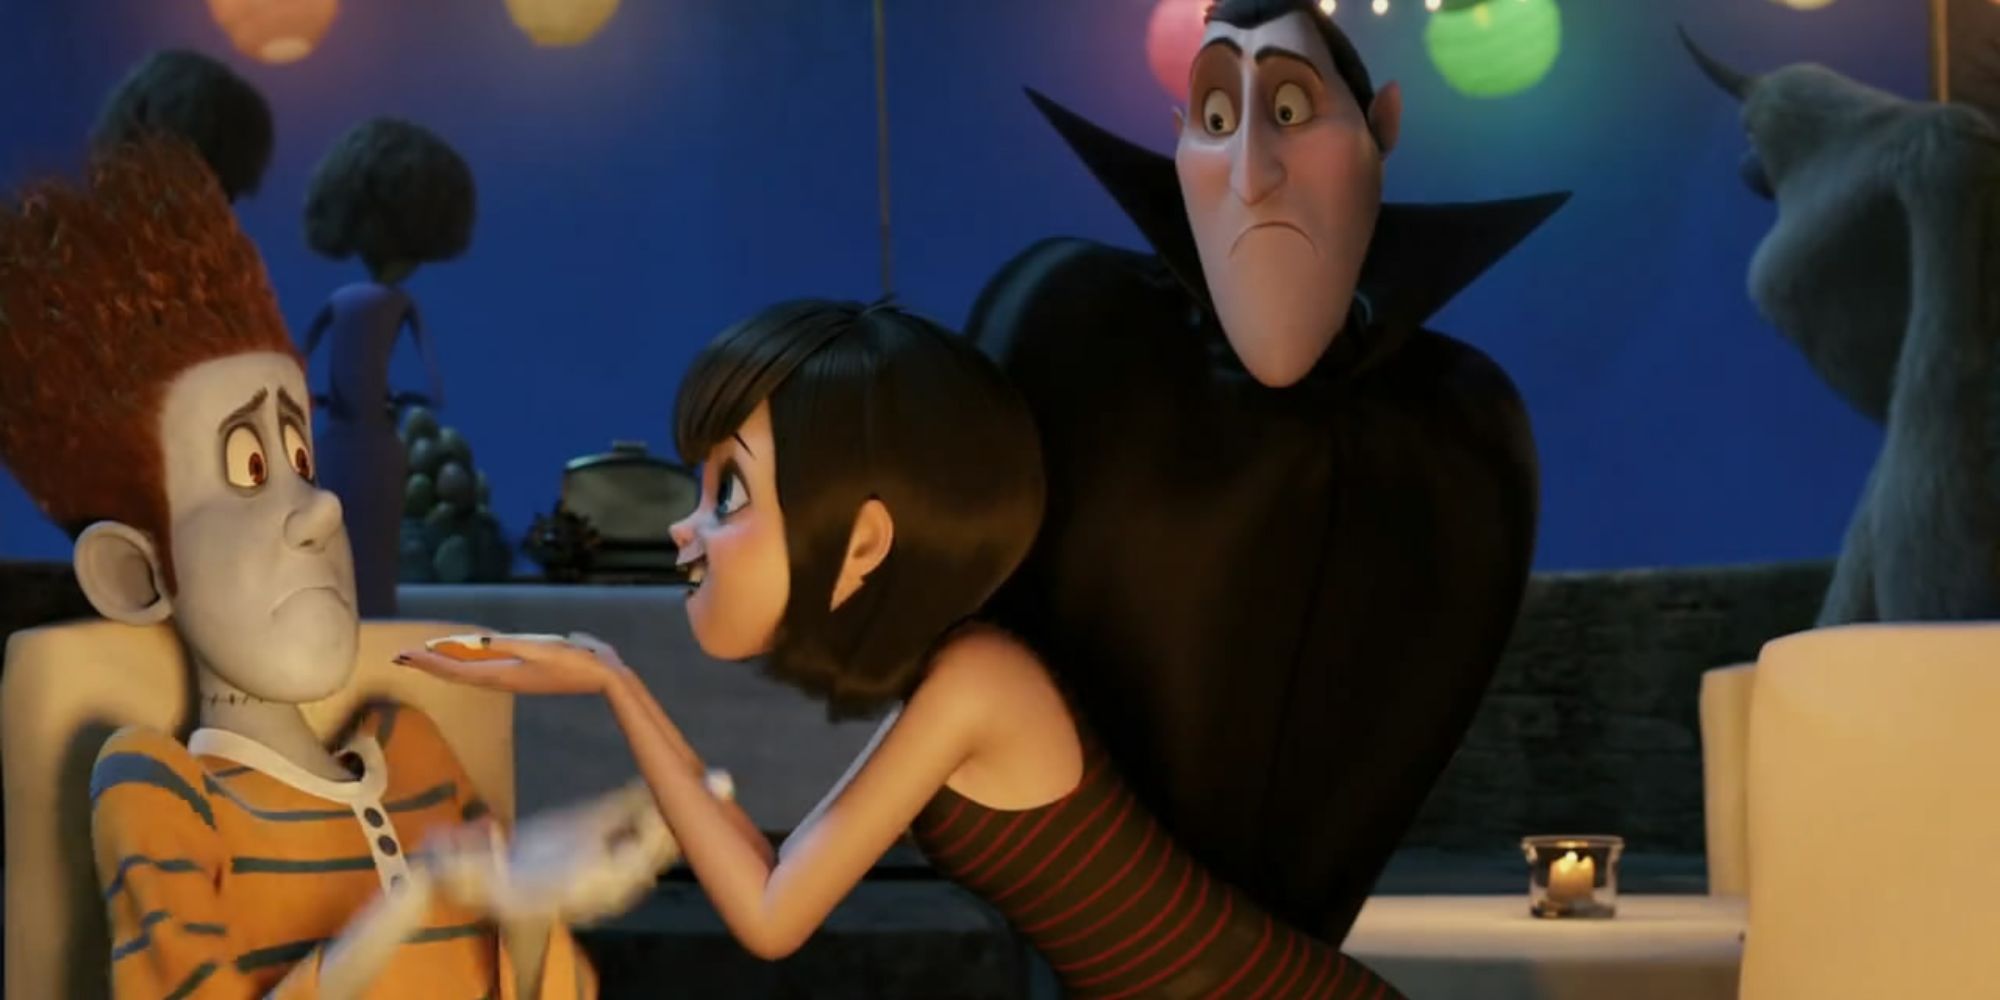 Dracula looks as his daughter holds her hand up to a buy in Hotel Transylvania